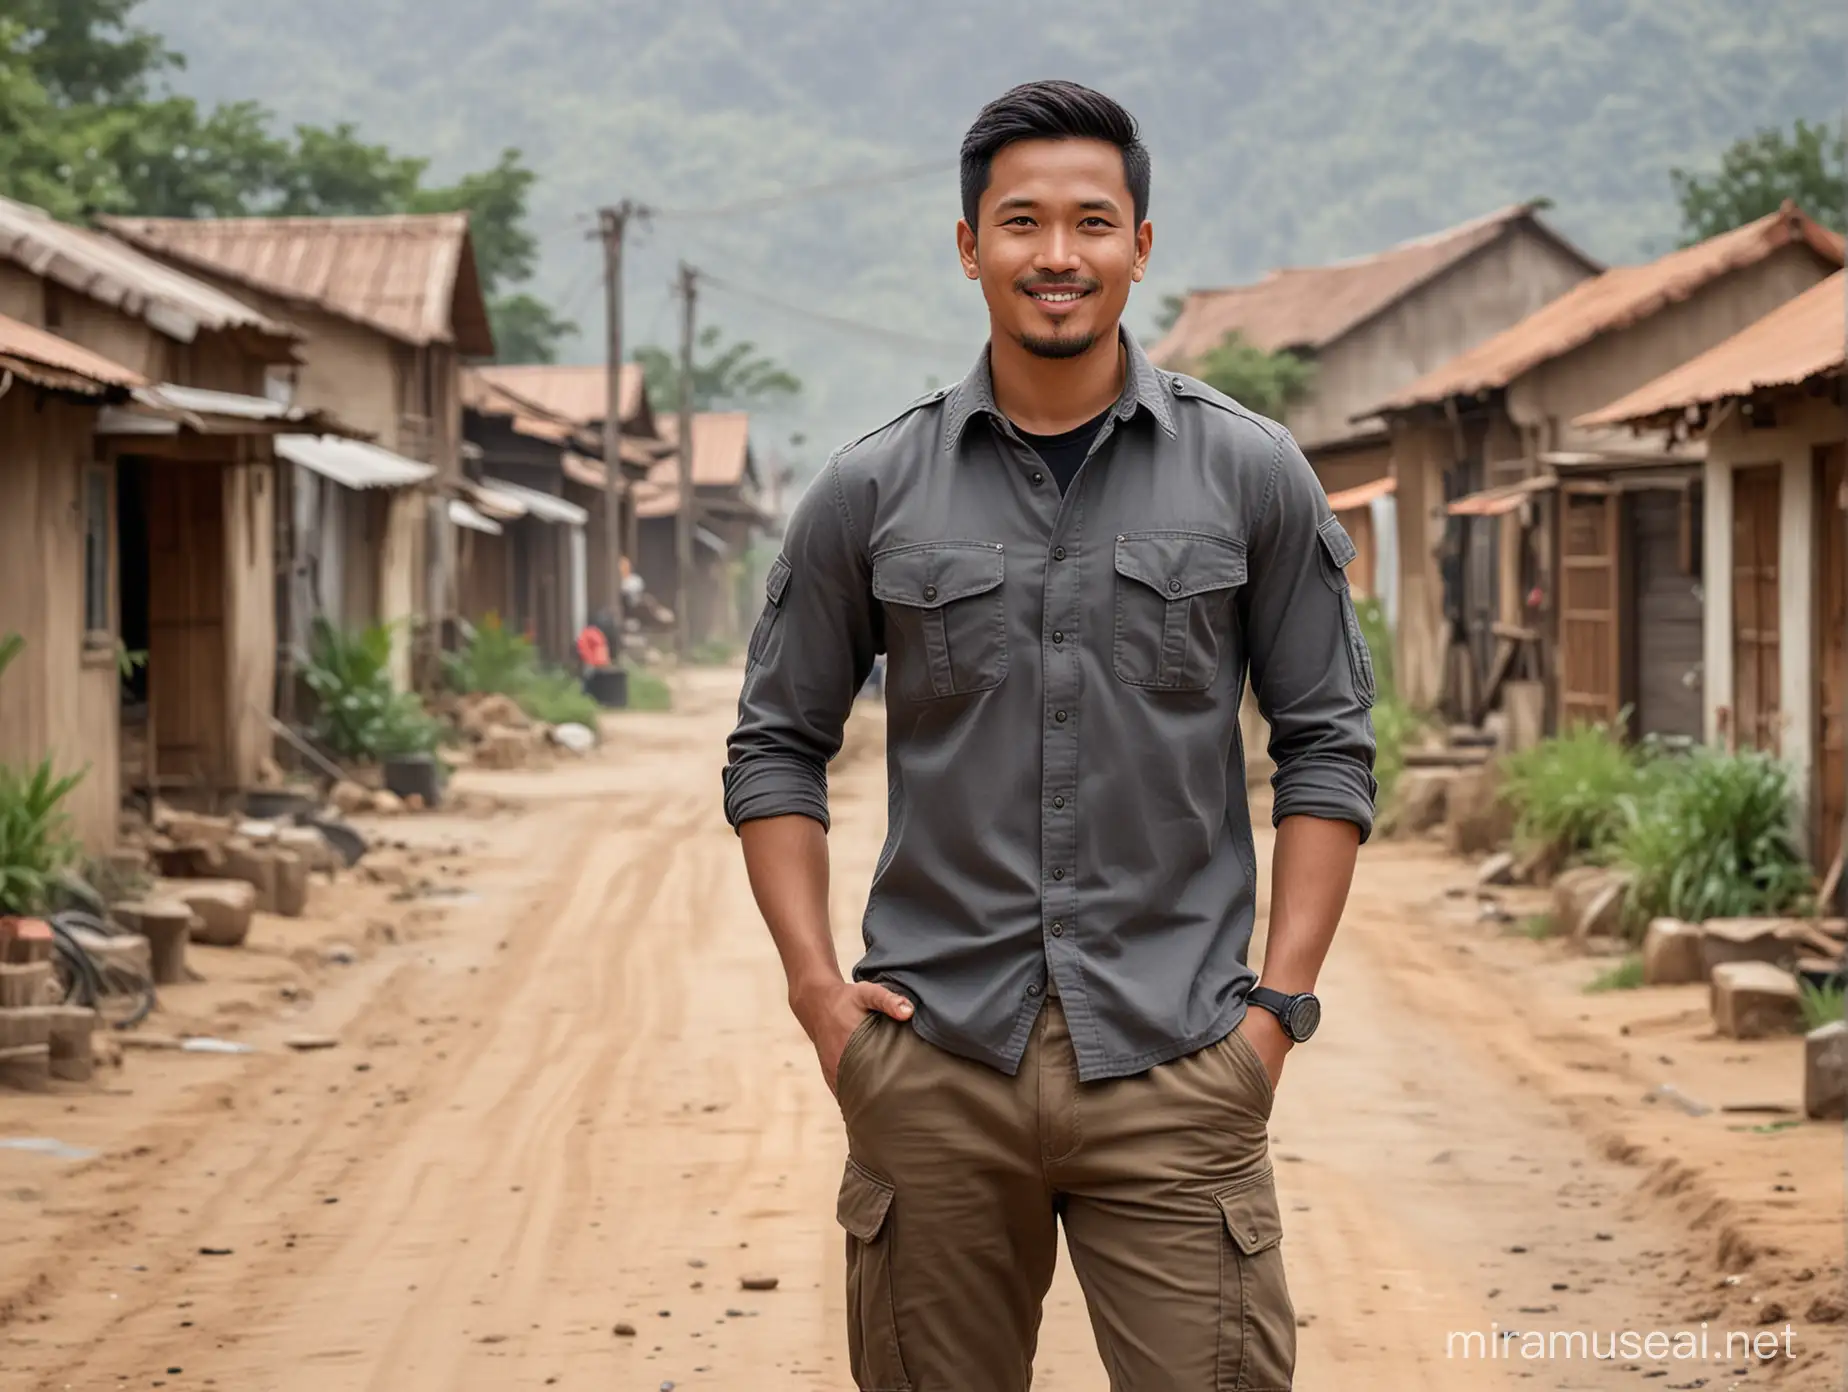 Smiling Indonesian Man in Tactical Attire on Village Dirt Road